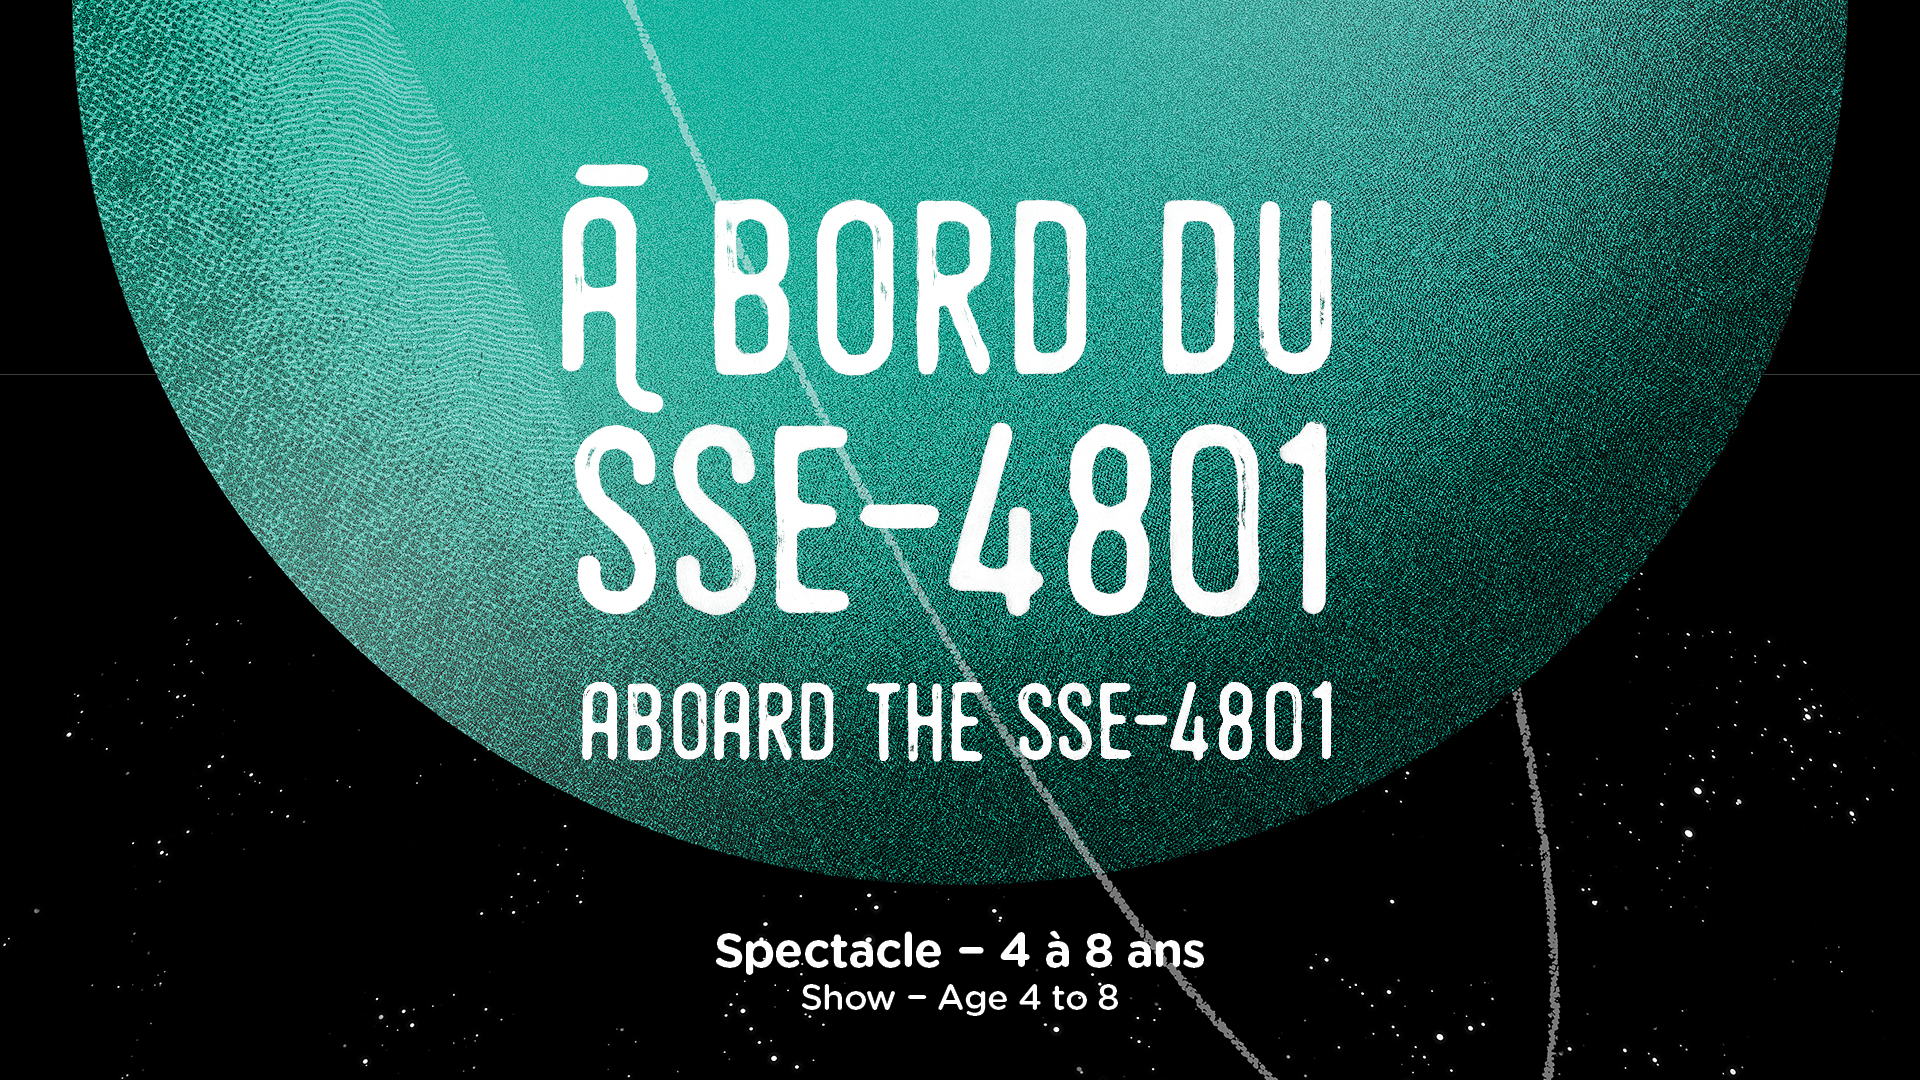 Aboard the SSE-4801 